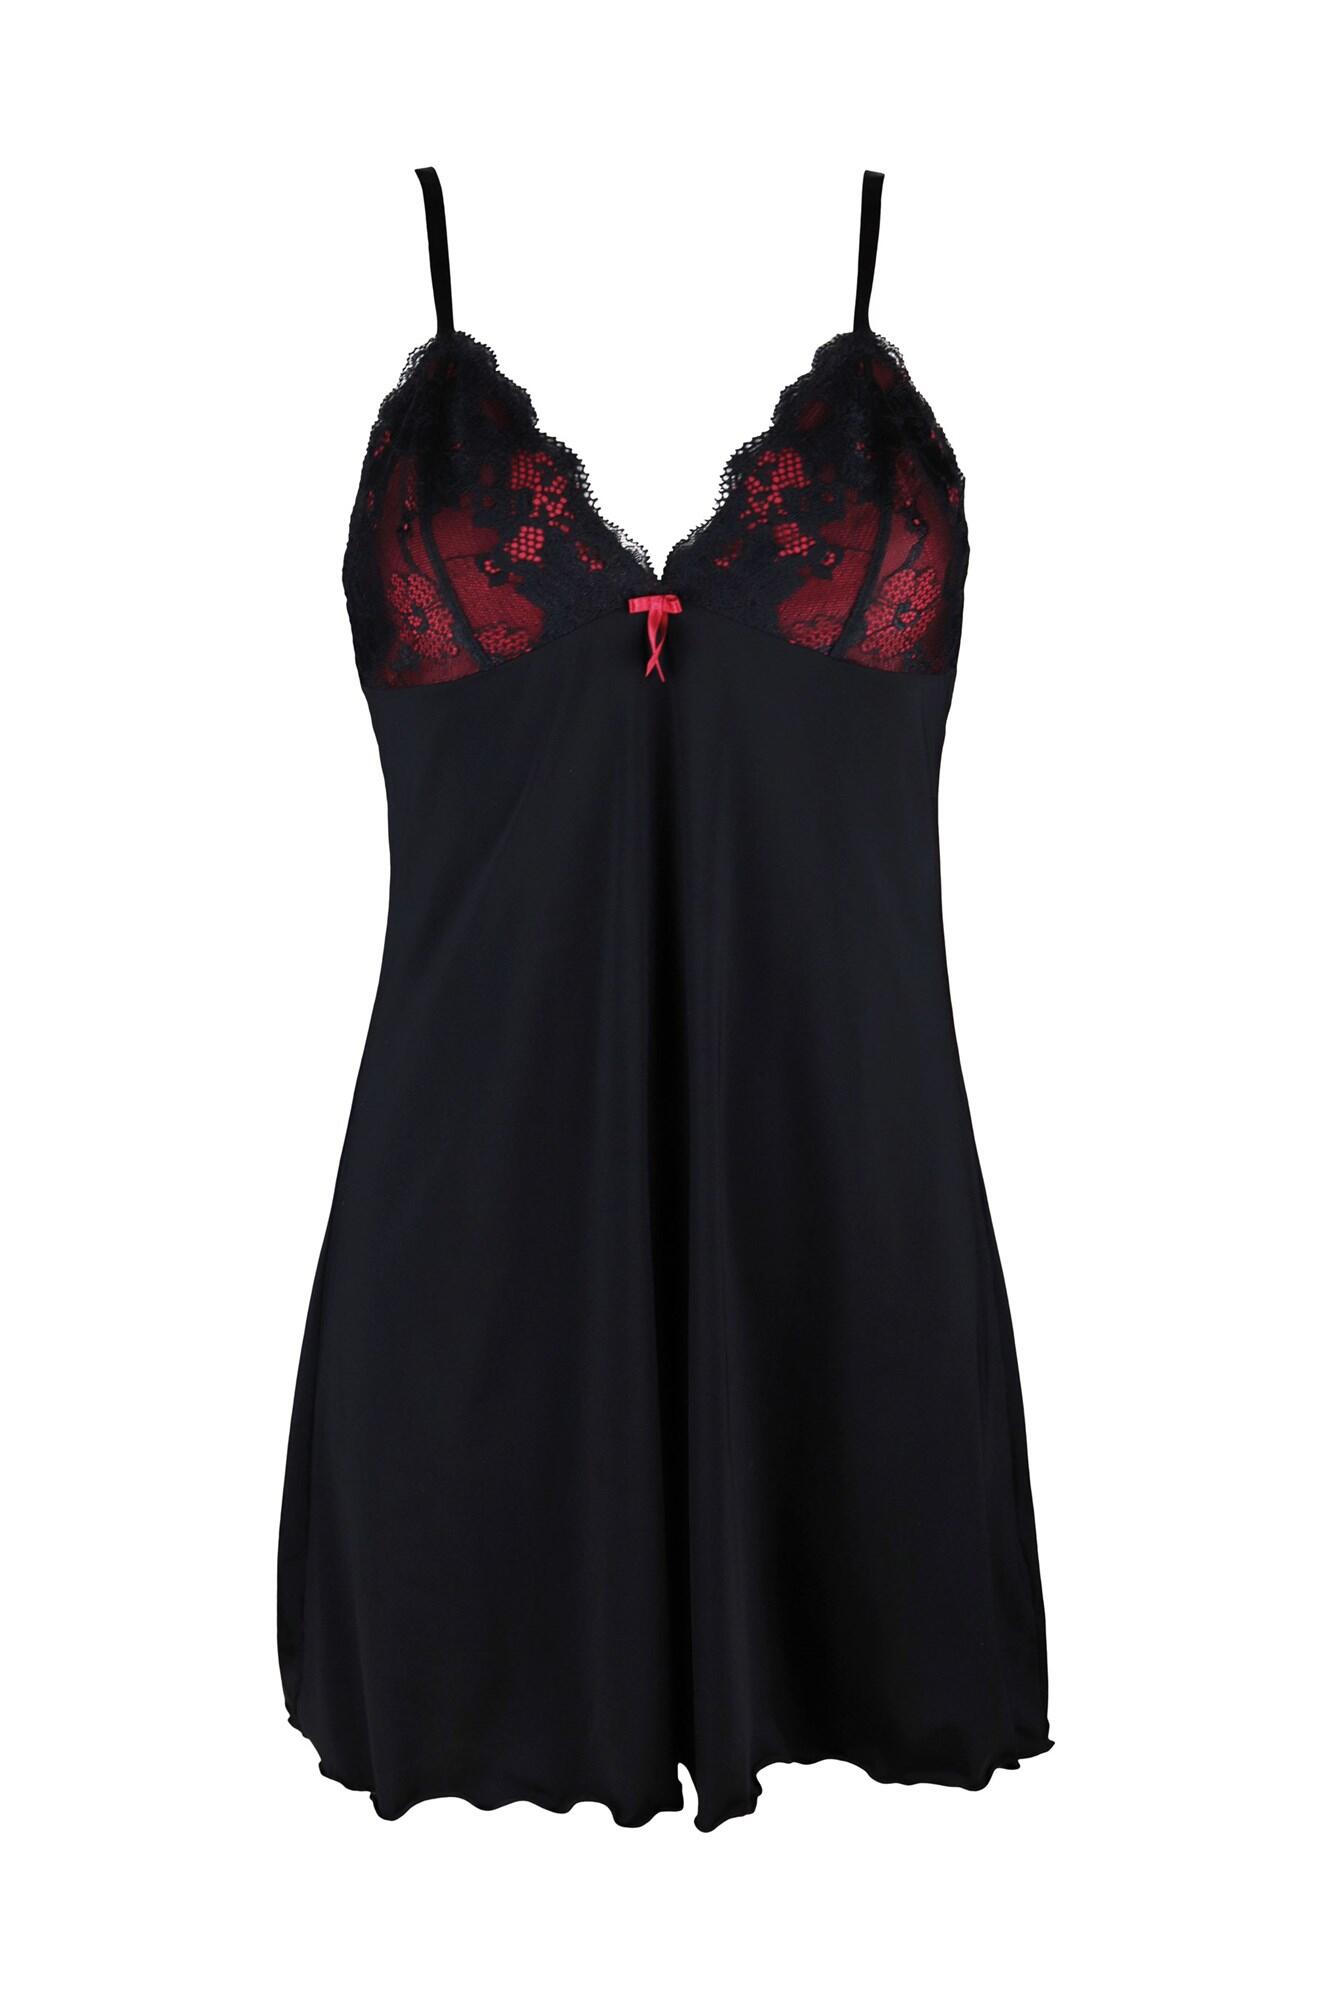 Amour Luxe Lace Chemise in Black/Scarlet | Pour Moi